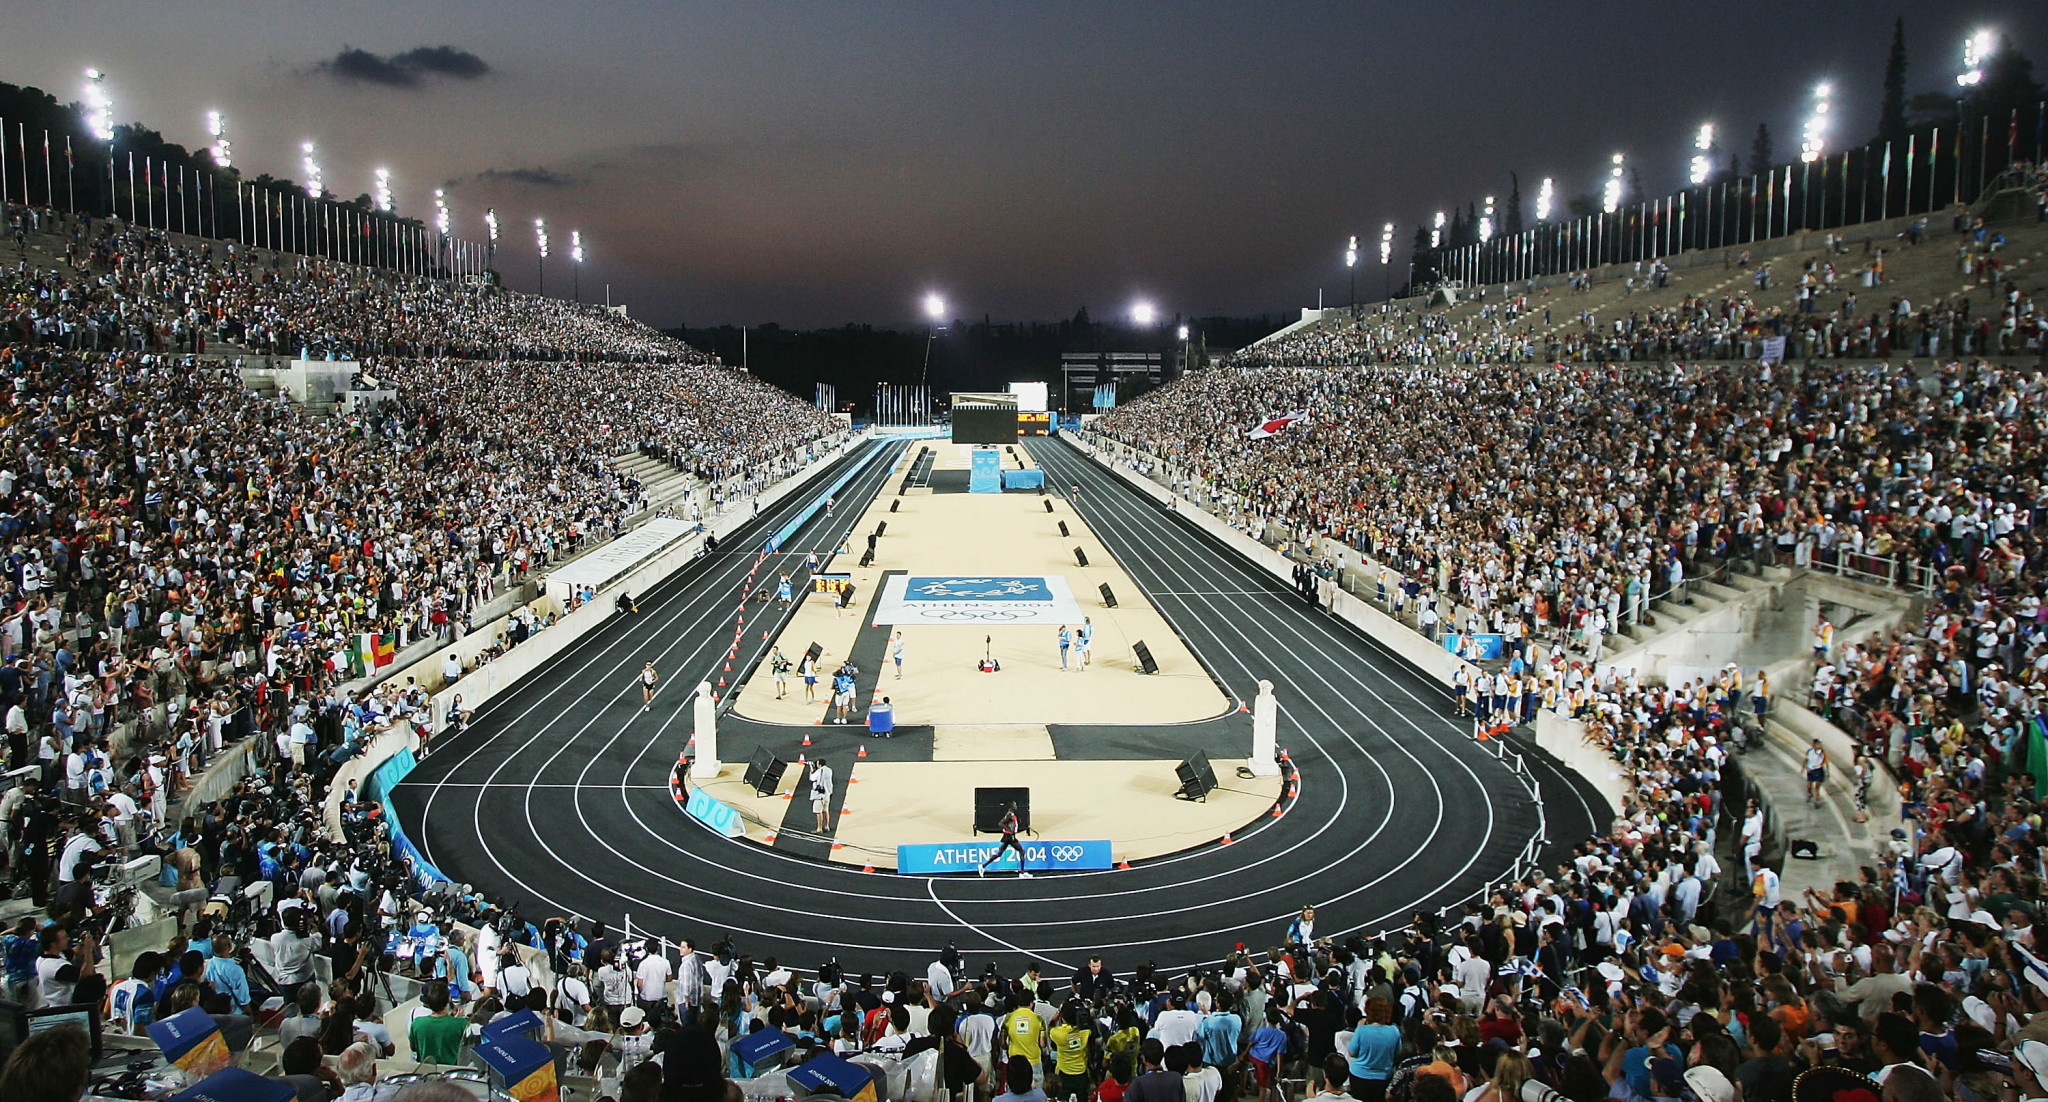 The Panathenaic Stadium hosted the finish of the Olympic marathons during Athens 2004 ©Getty Images